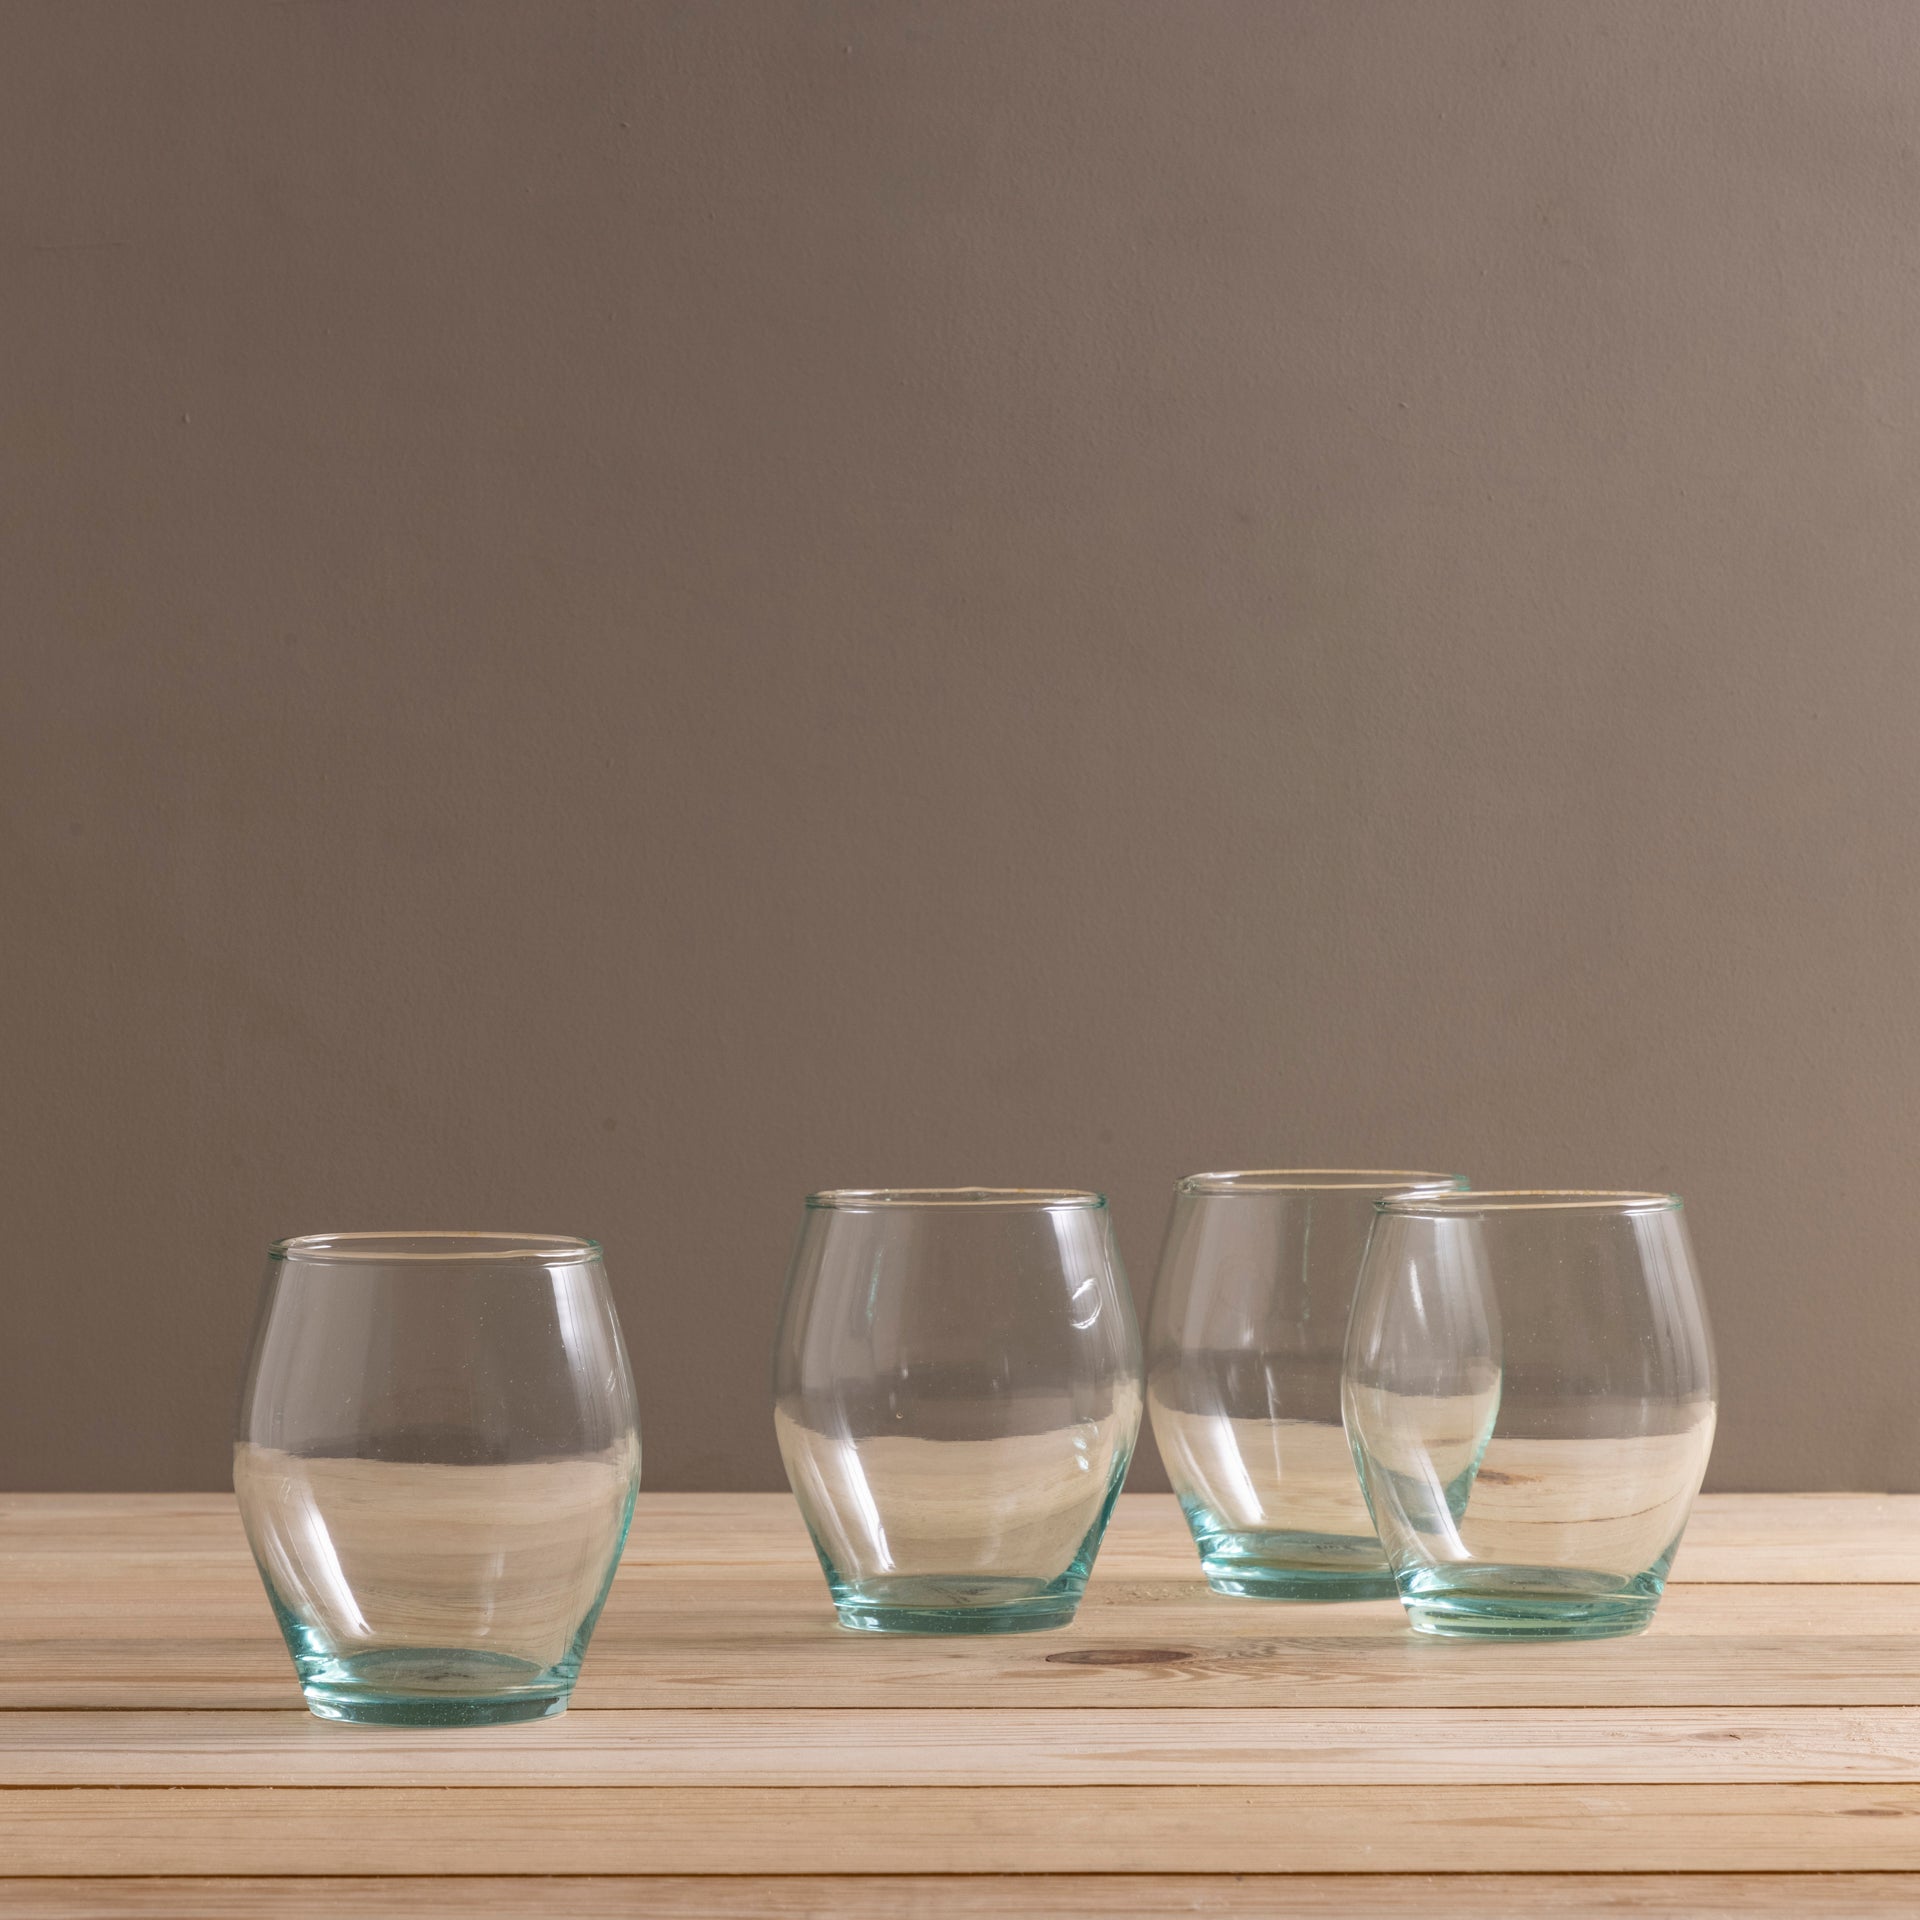 Premium Recycled Stemless Tulip Glass, Set of 4